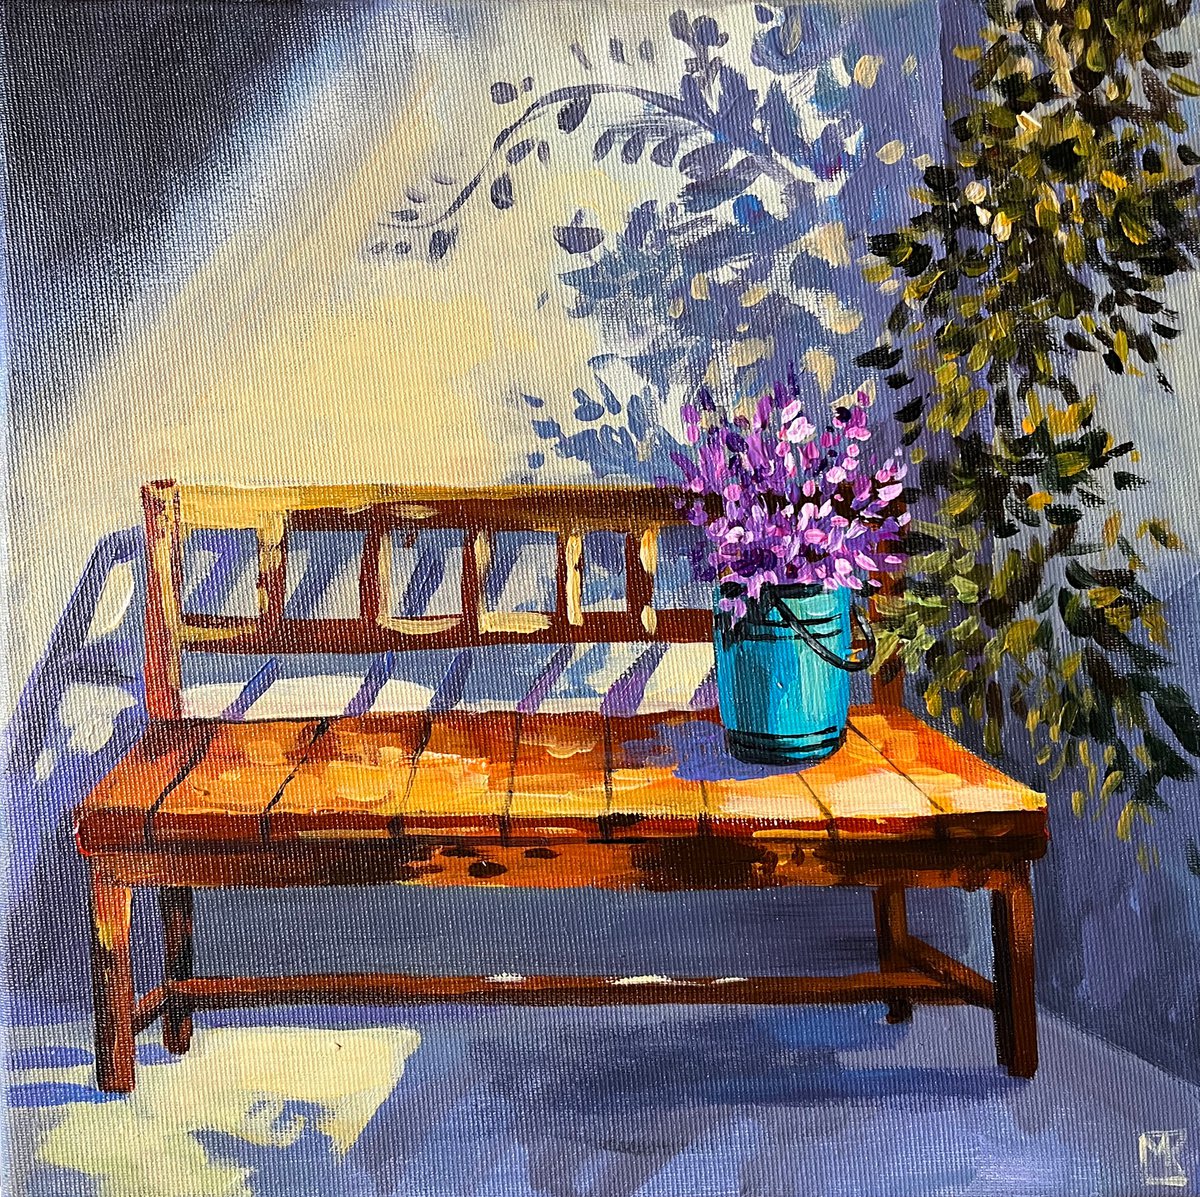 Cute little bench by Maria Kireev